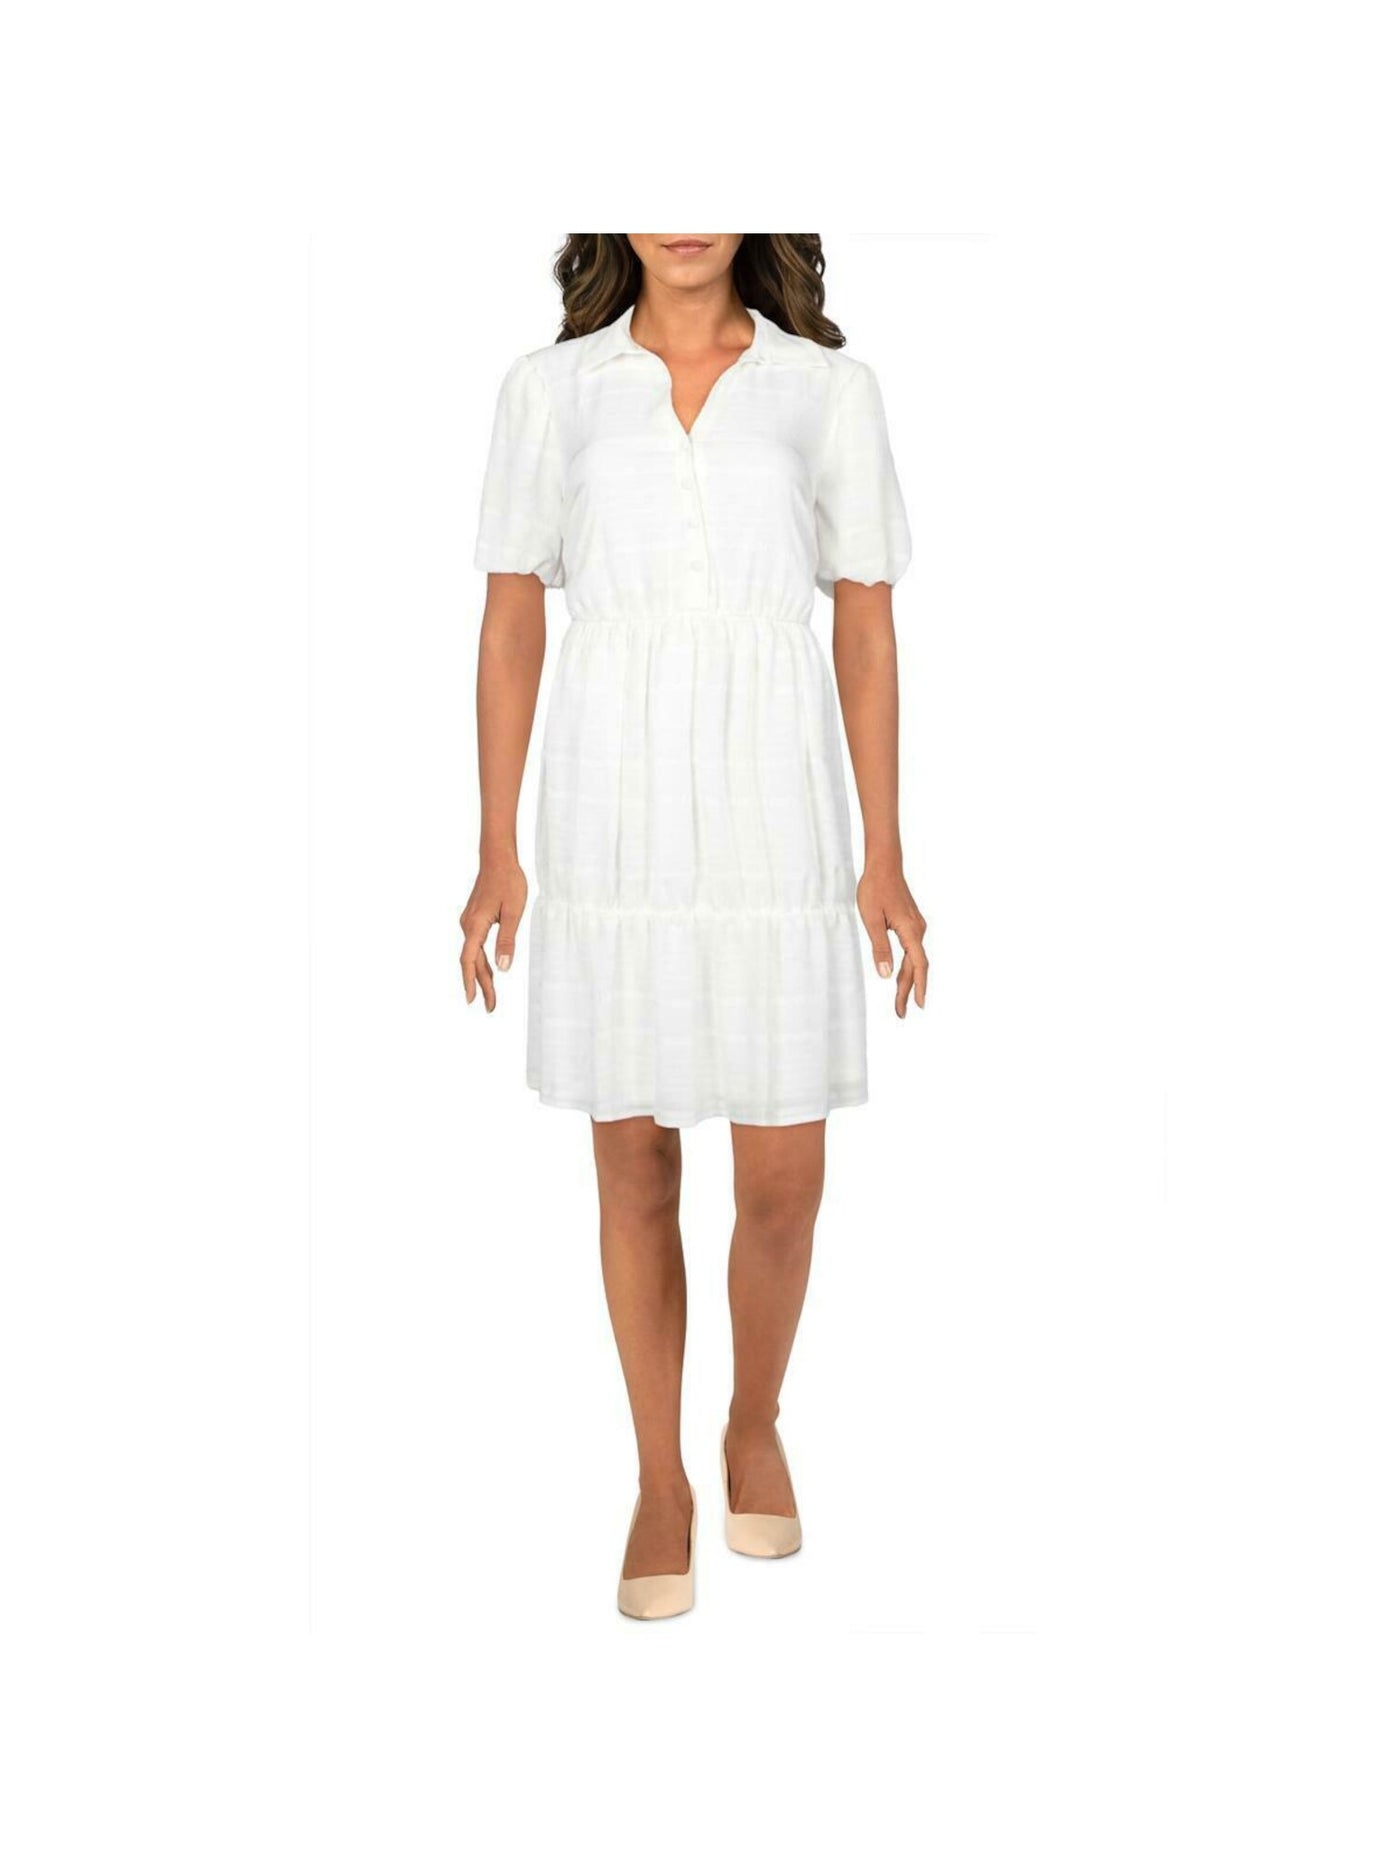 KENSIE DRESSES Womens White Stretch Textured Ruffled Sheer Lined Button Front Short Sleeve Collared Above The Knee Evening Sheath Dress 14